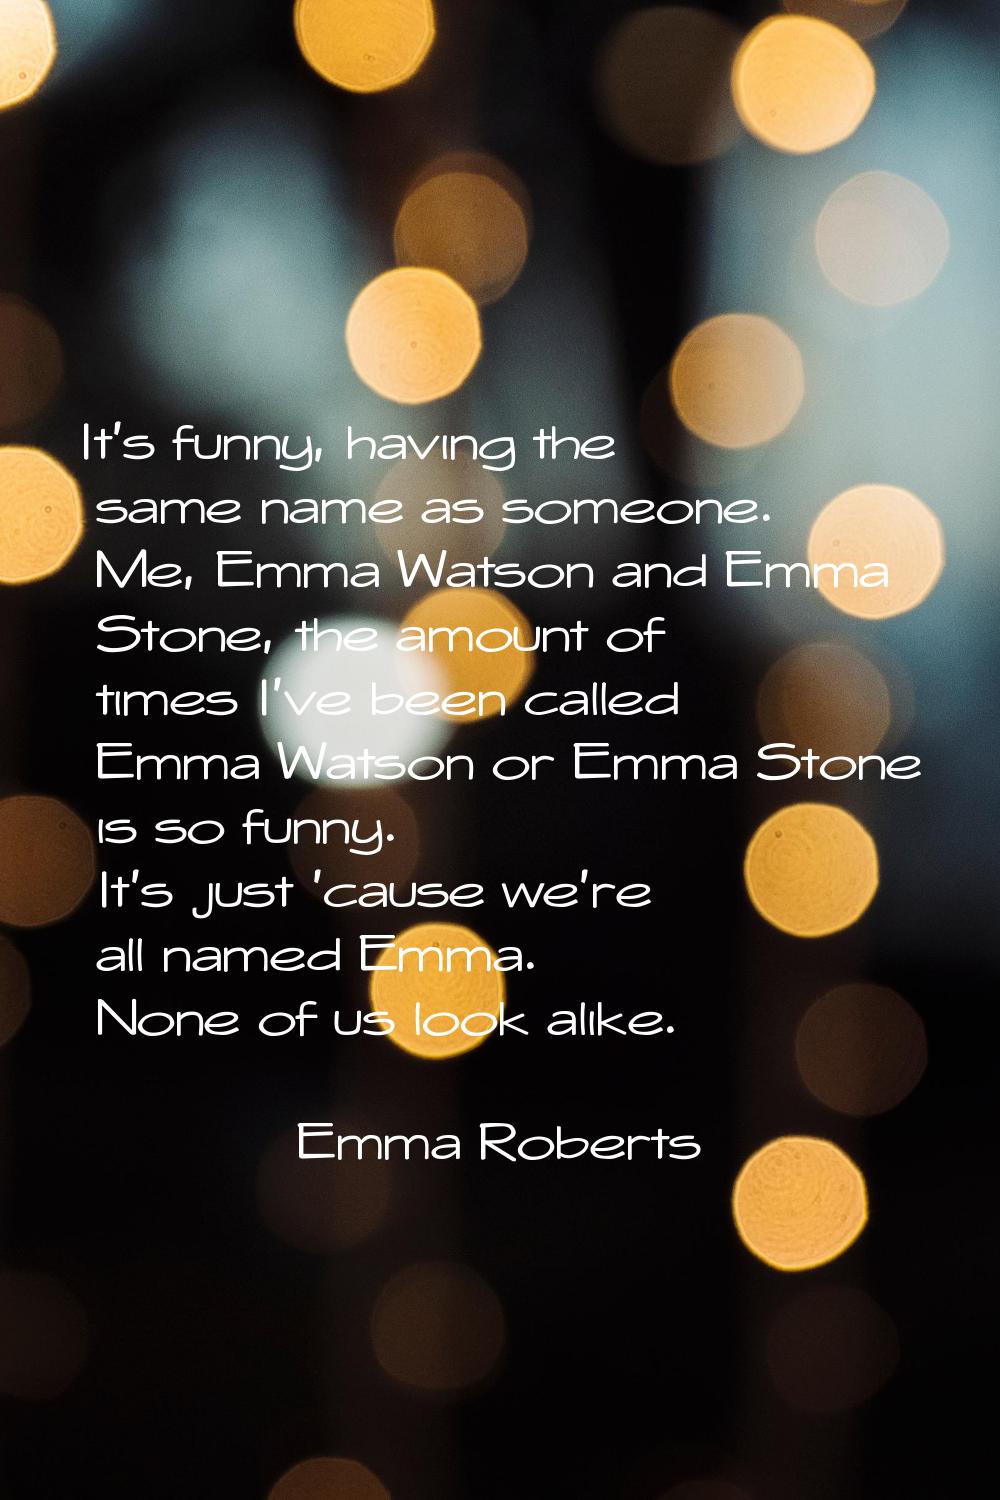 It's funny, having the same name as someone. Me, Emma Watson and Emma Stone, the amount of times I'